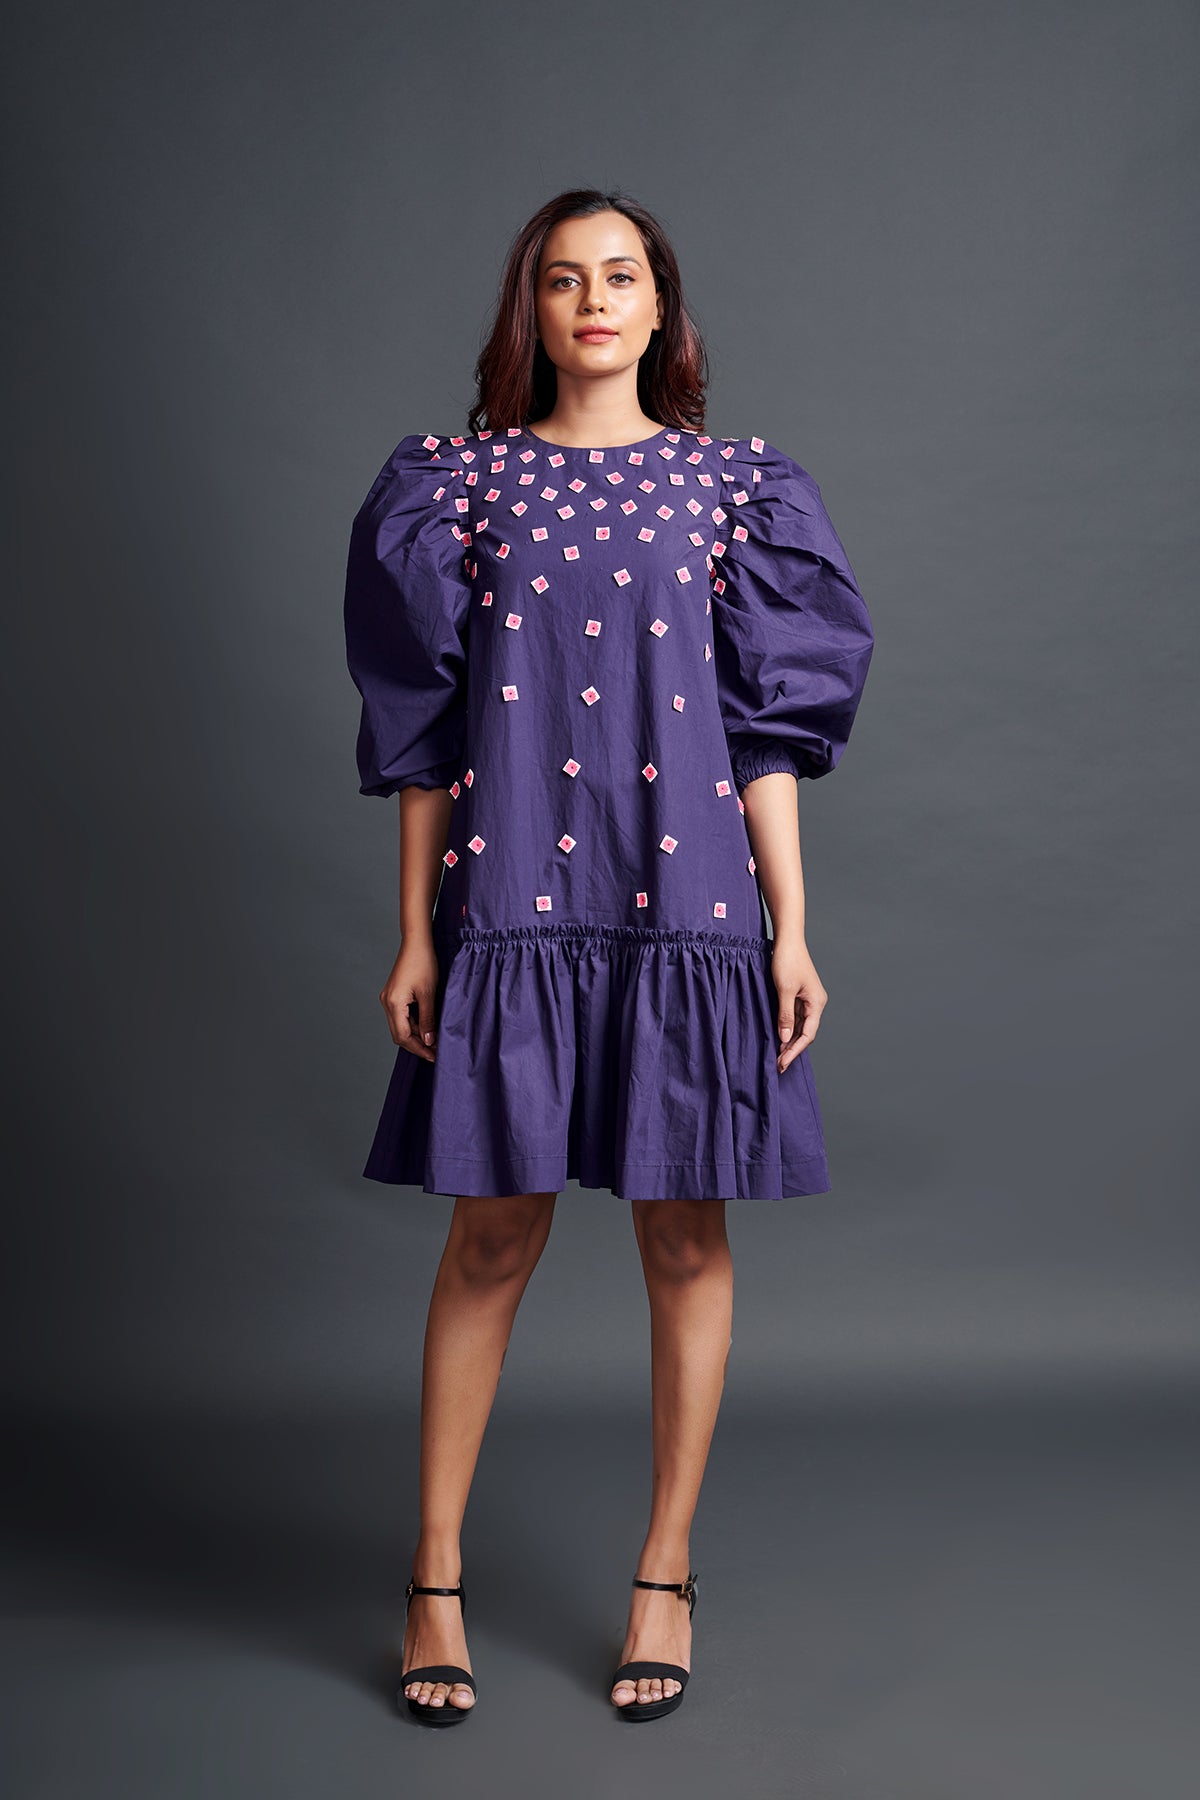 Image of PURPLE GATHERED BACKLESS DRESS IN COTTON BASE WITH CUTWORK EMBROIDERY. From savoirfashions.com